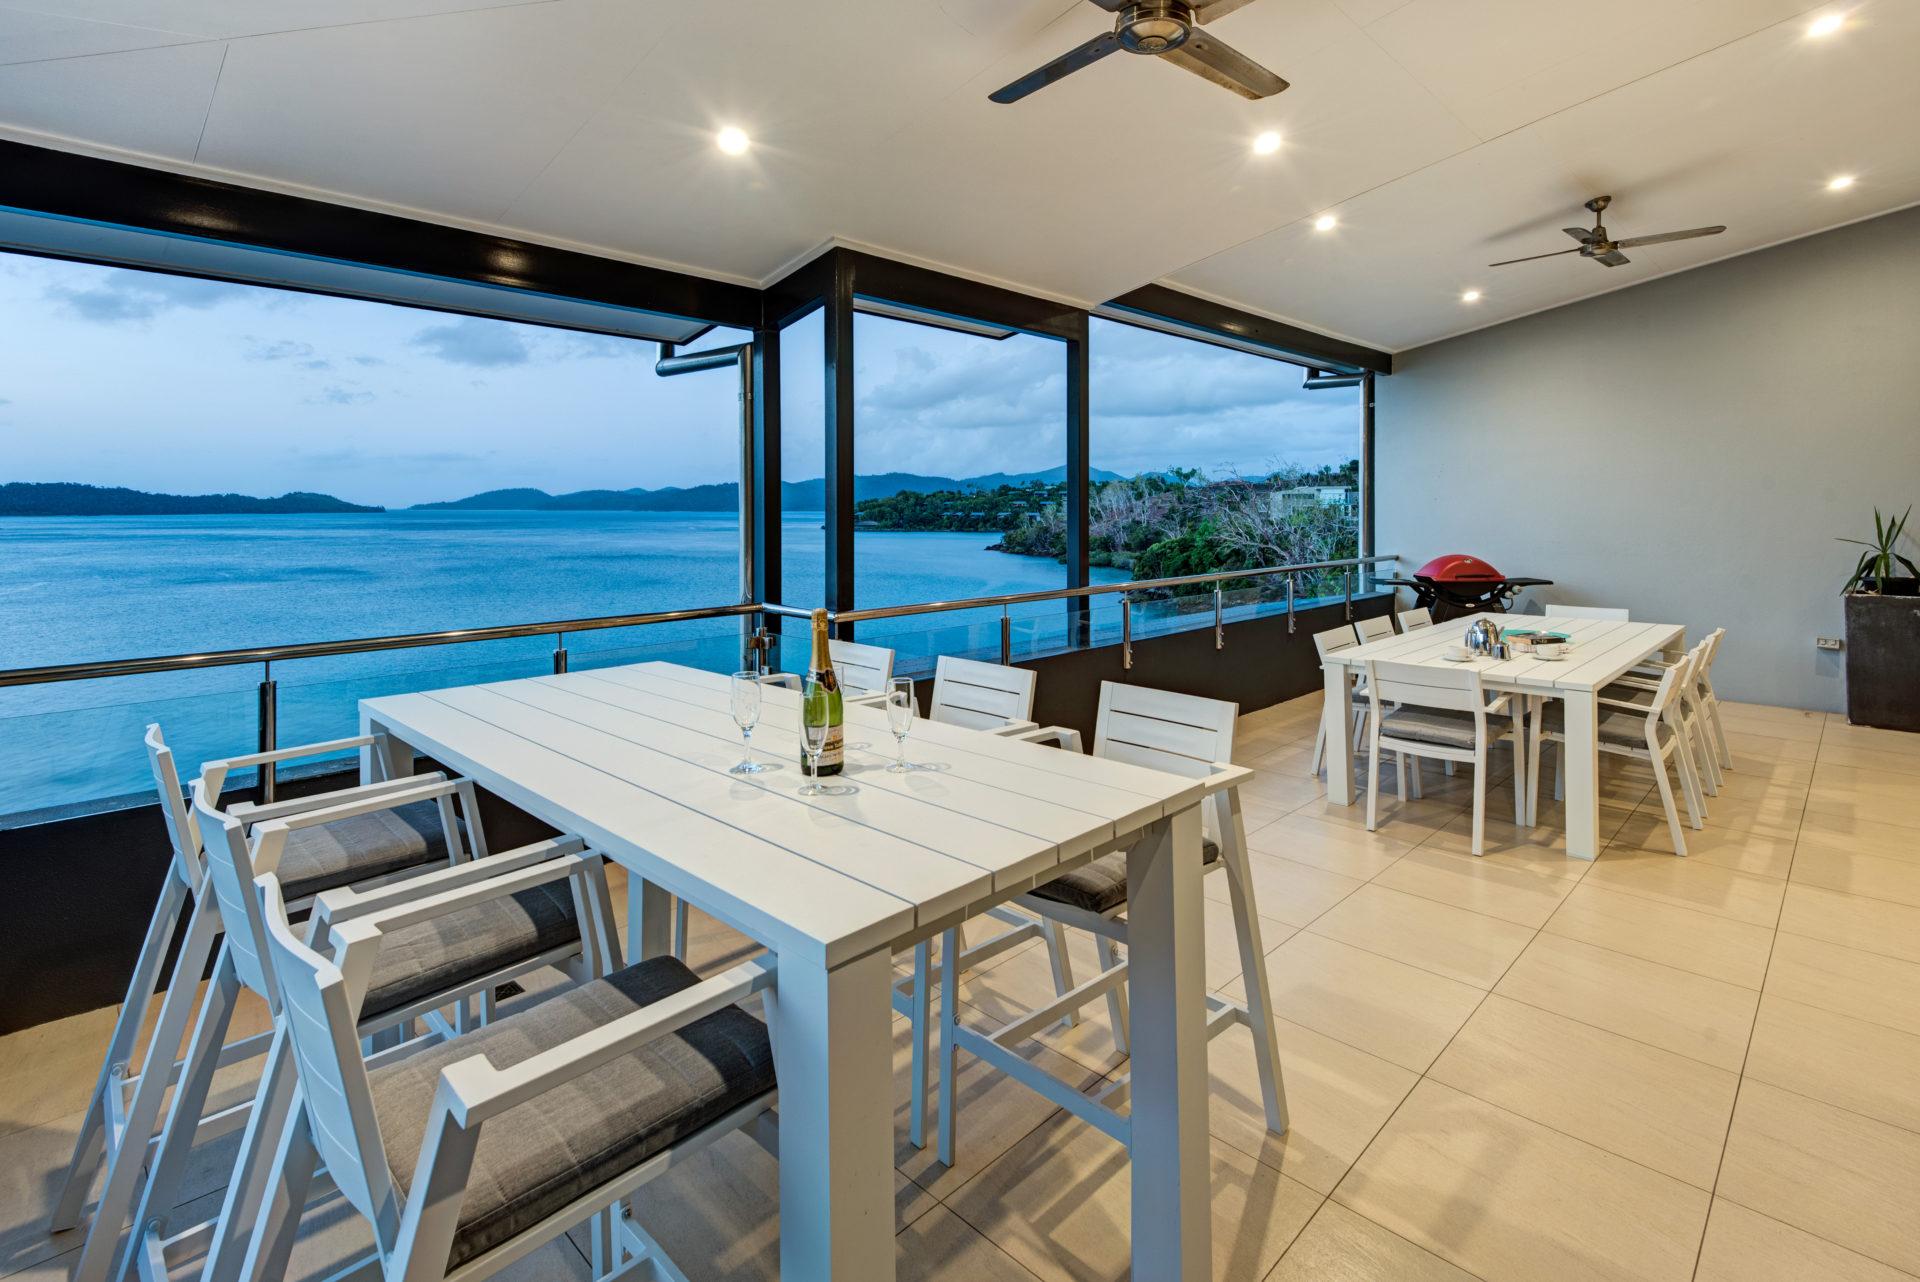 Property Image 1 - Edge 16 - Endless ocean views, golf buggy and complementary buggy service